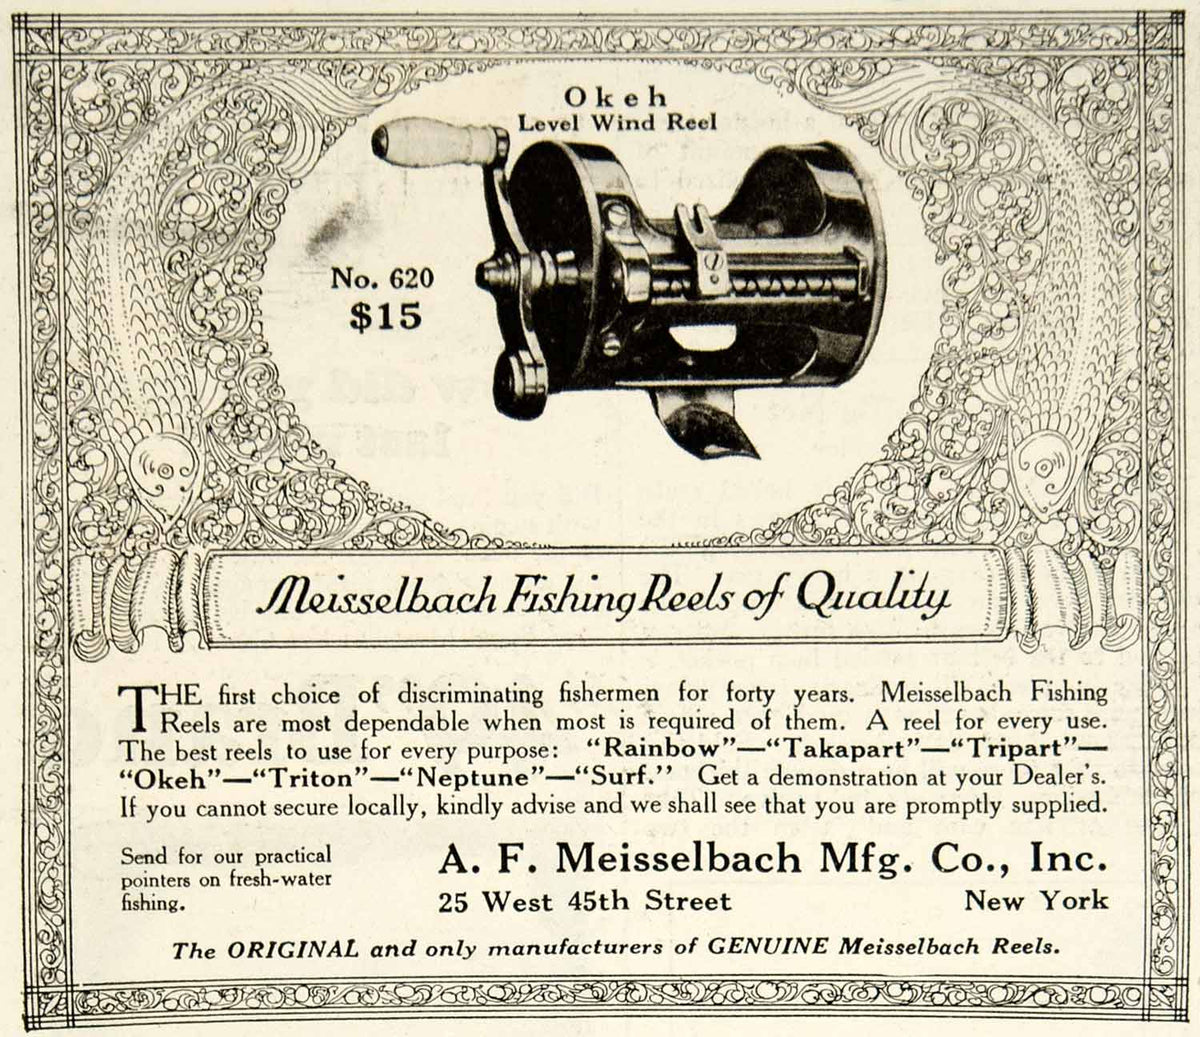 1925 Ad AF Meisselbach Fishing Reel 25 W 45th St NYC Bait Tackle Sport